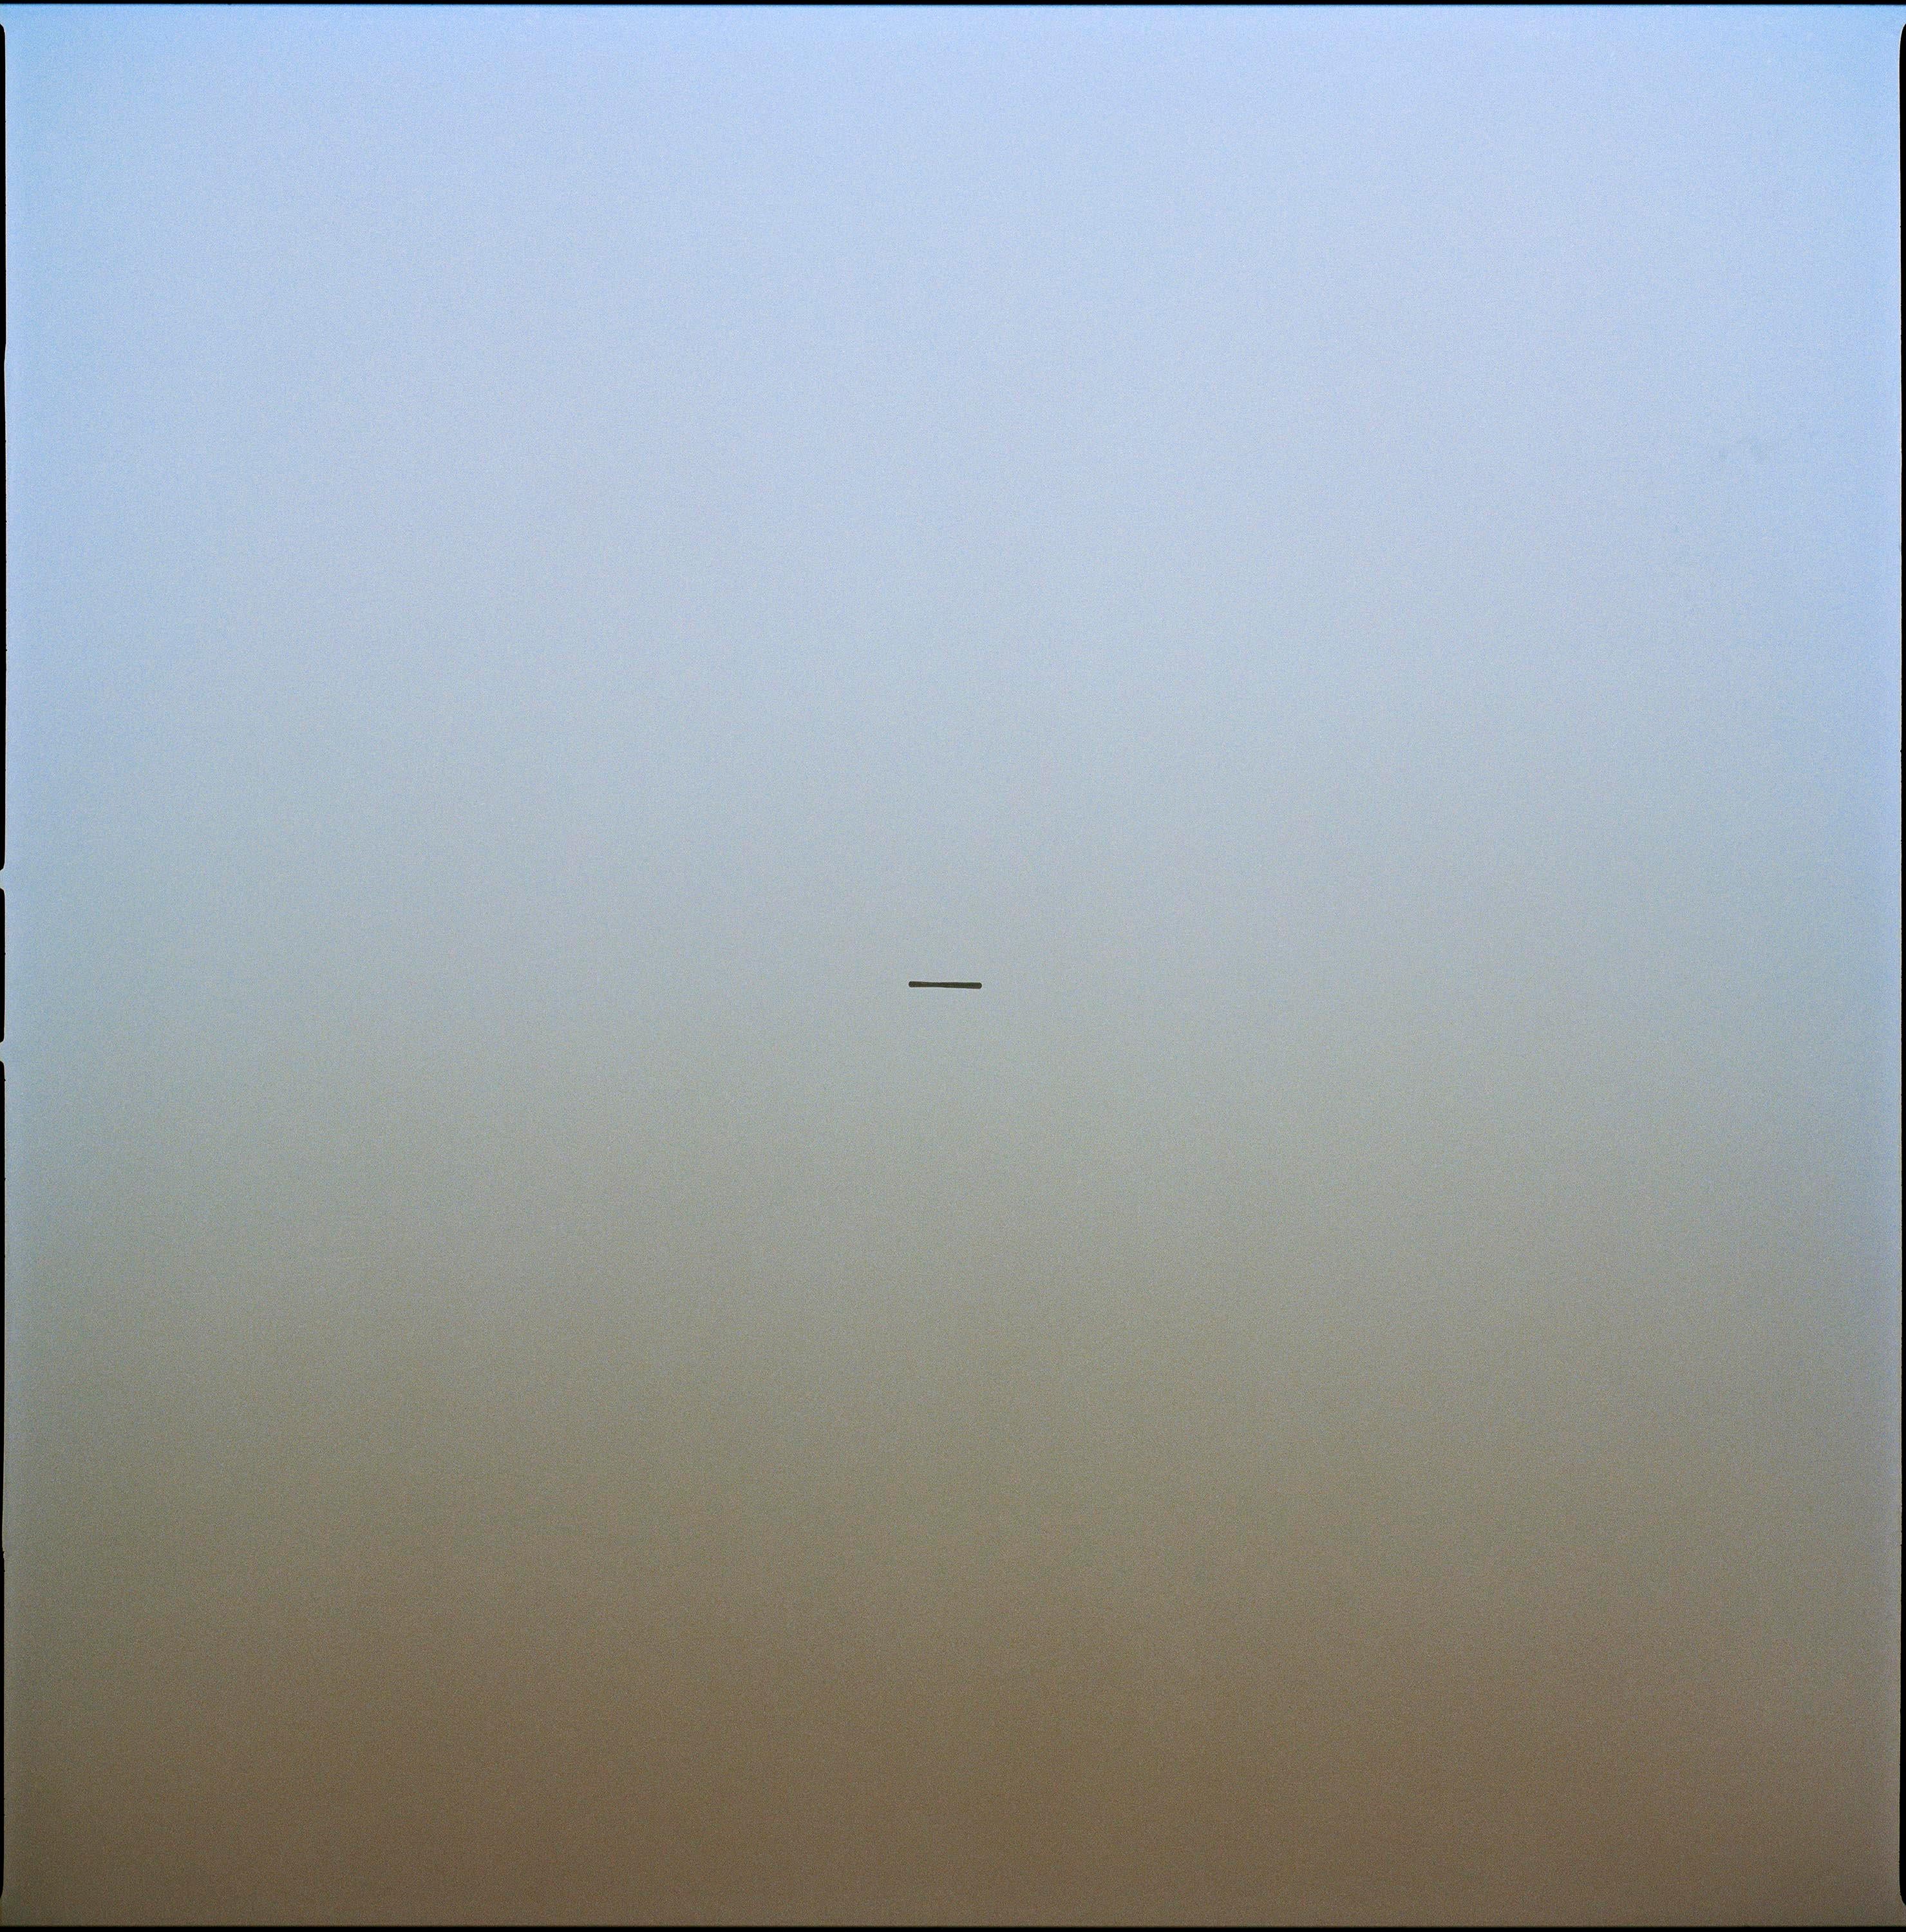 Nigel Parry Landscape Photograph - Lake IV - beige and blue colors in the artwork